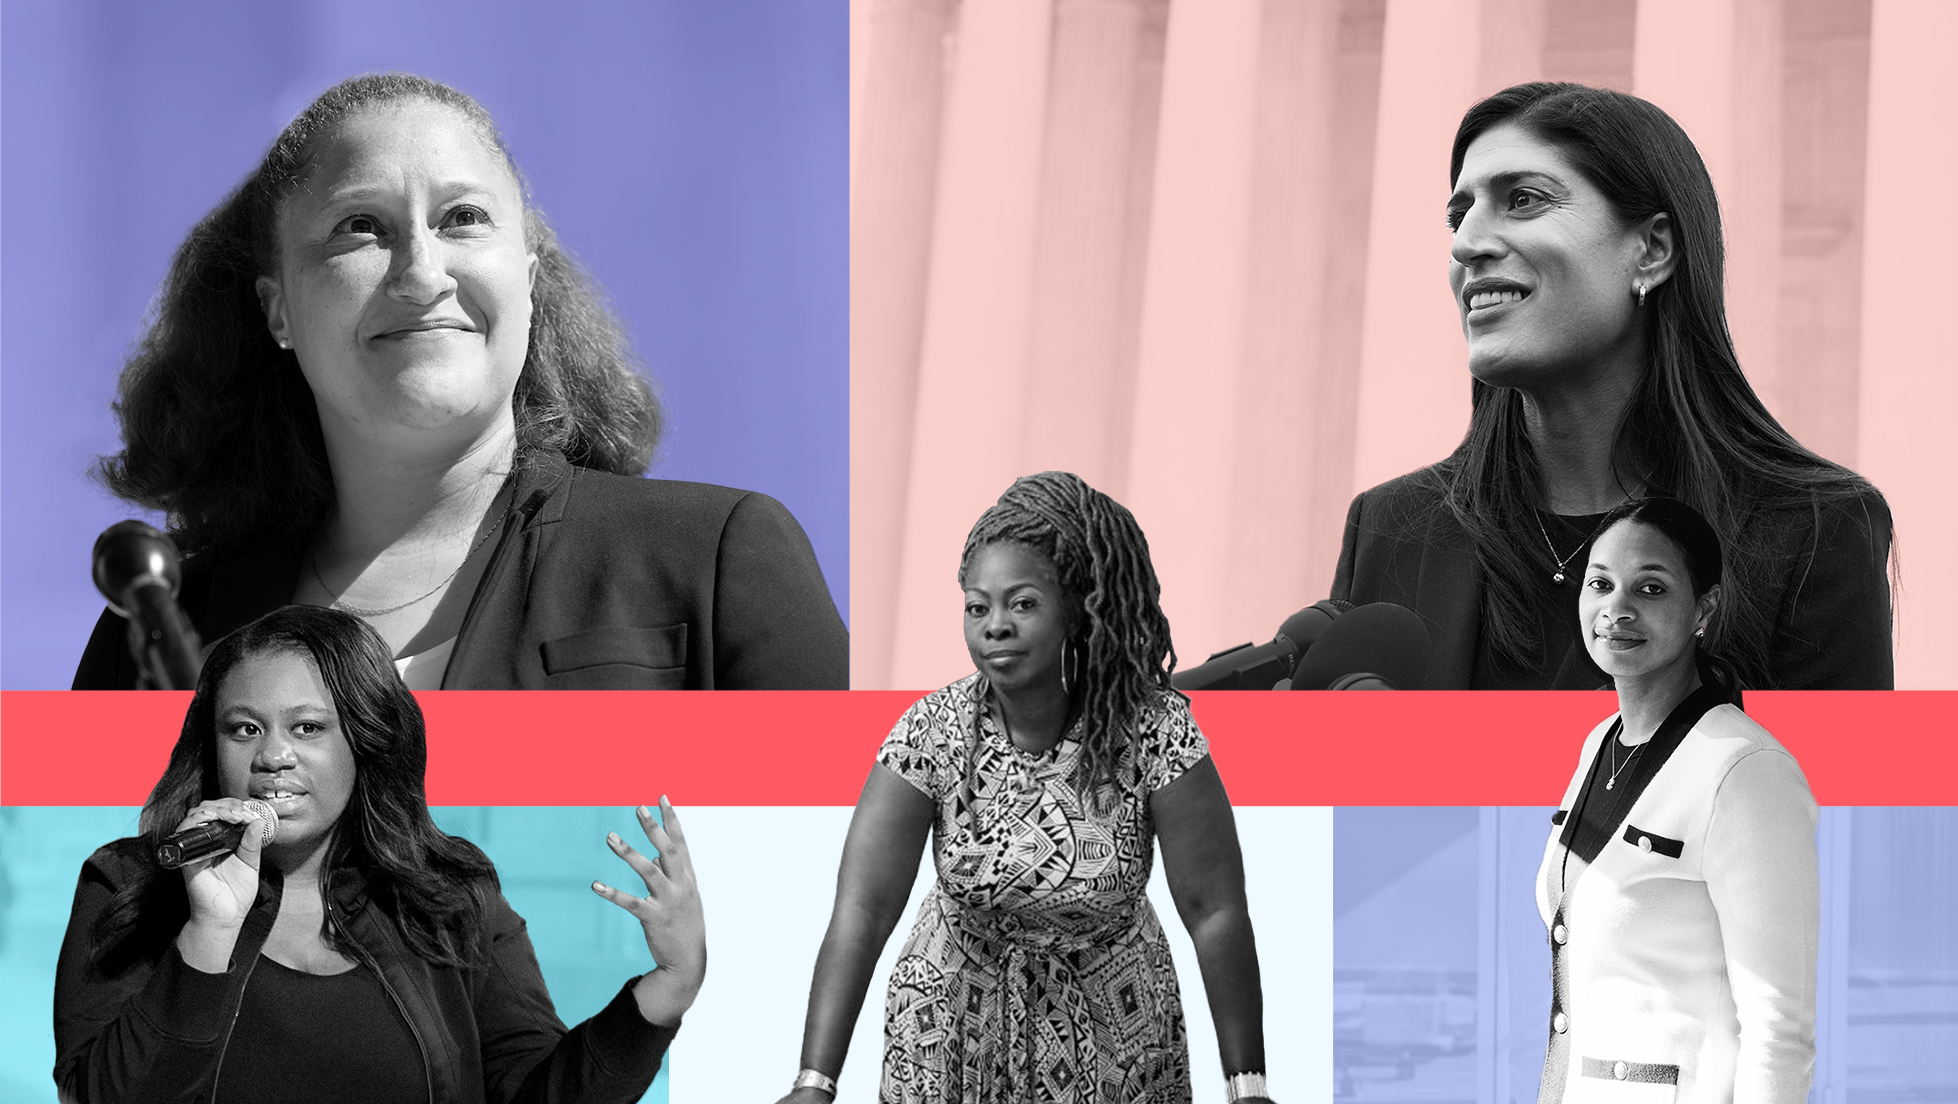 A collage of five women advocates and activists who are leading the fight for voting rights. On the top left is a black and white image of NAACP Legal Defense Fund Senior Counsel Leah Aden on a light purple background. To the right of Aden is a black and white image of Elias Law Group Partner Abbha Khanna on a light pink background. Below Aden and Khanna is a light red dividing line. Below the red line are three more black and white images of women advocates. Pictured from left to right is: Rise CEO Mary-Pat Hector on a teal background, Black Voters Matter co-founder LaTosha Brown and Elias Law Group Partner Aria Branch.